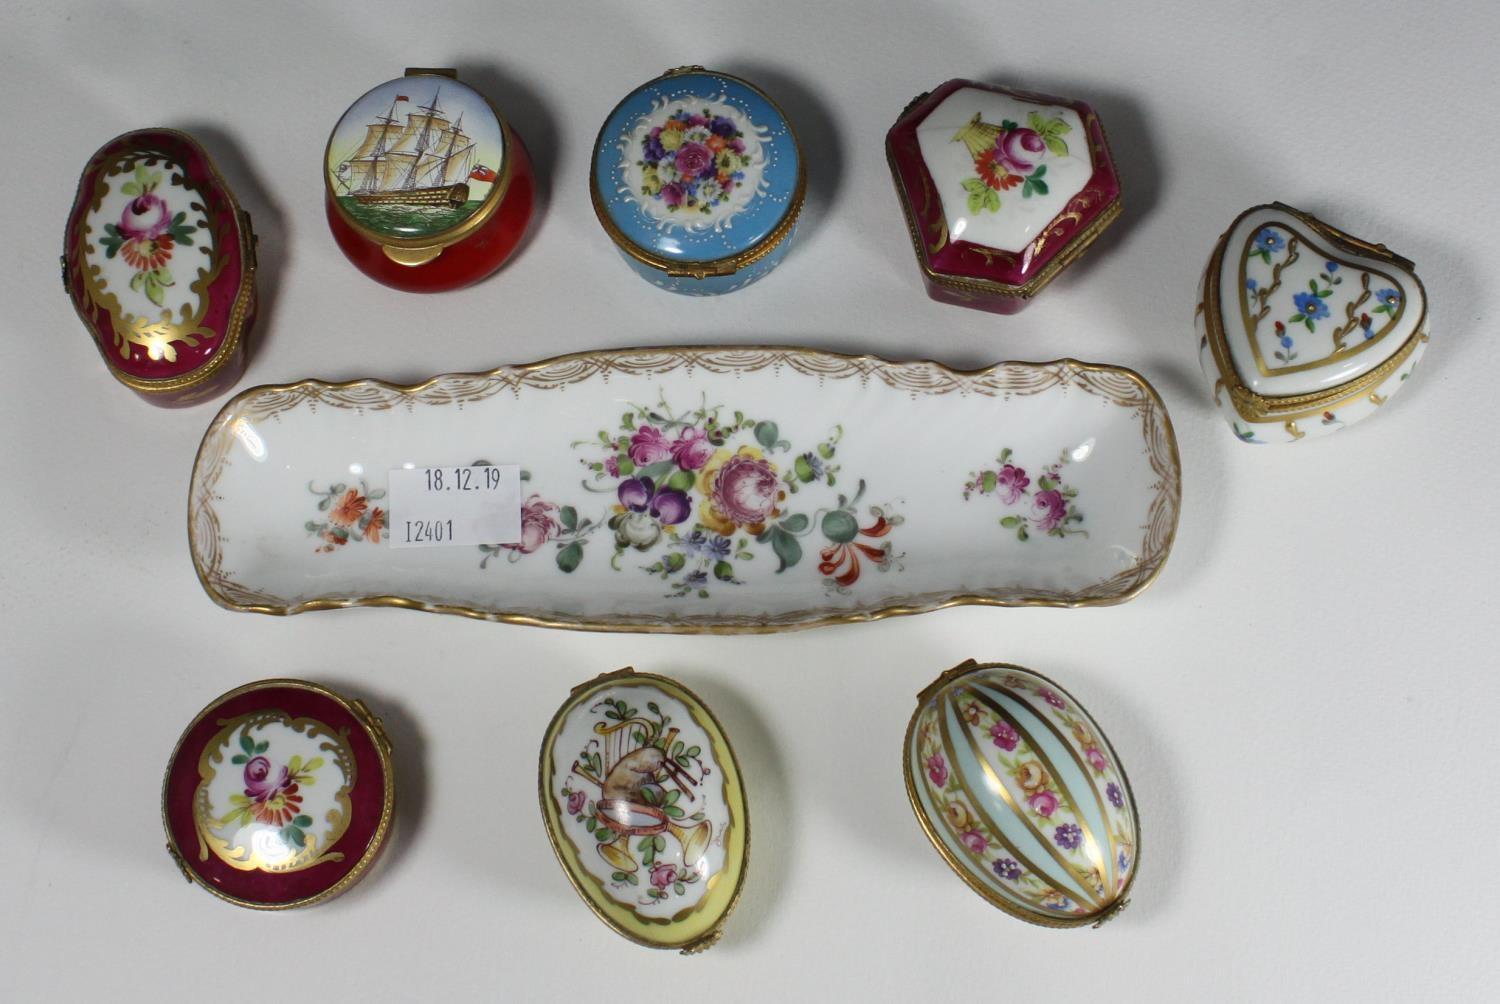 Seven enamelled French porcelain shaped boxes with gilt-metal-mounted hinged covers and polychrome - Image 2 of 2